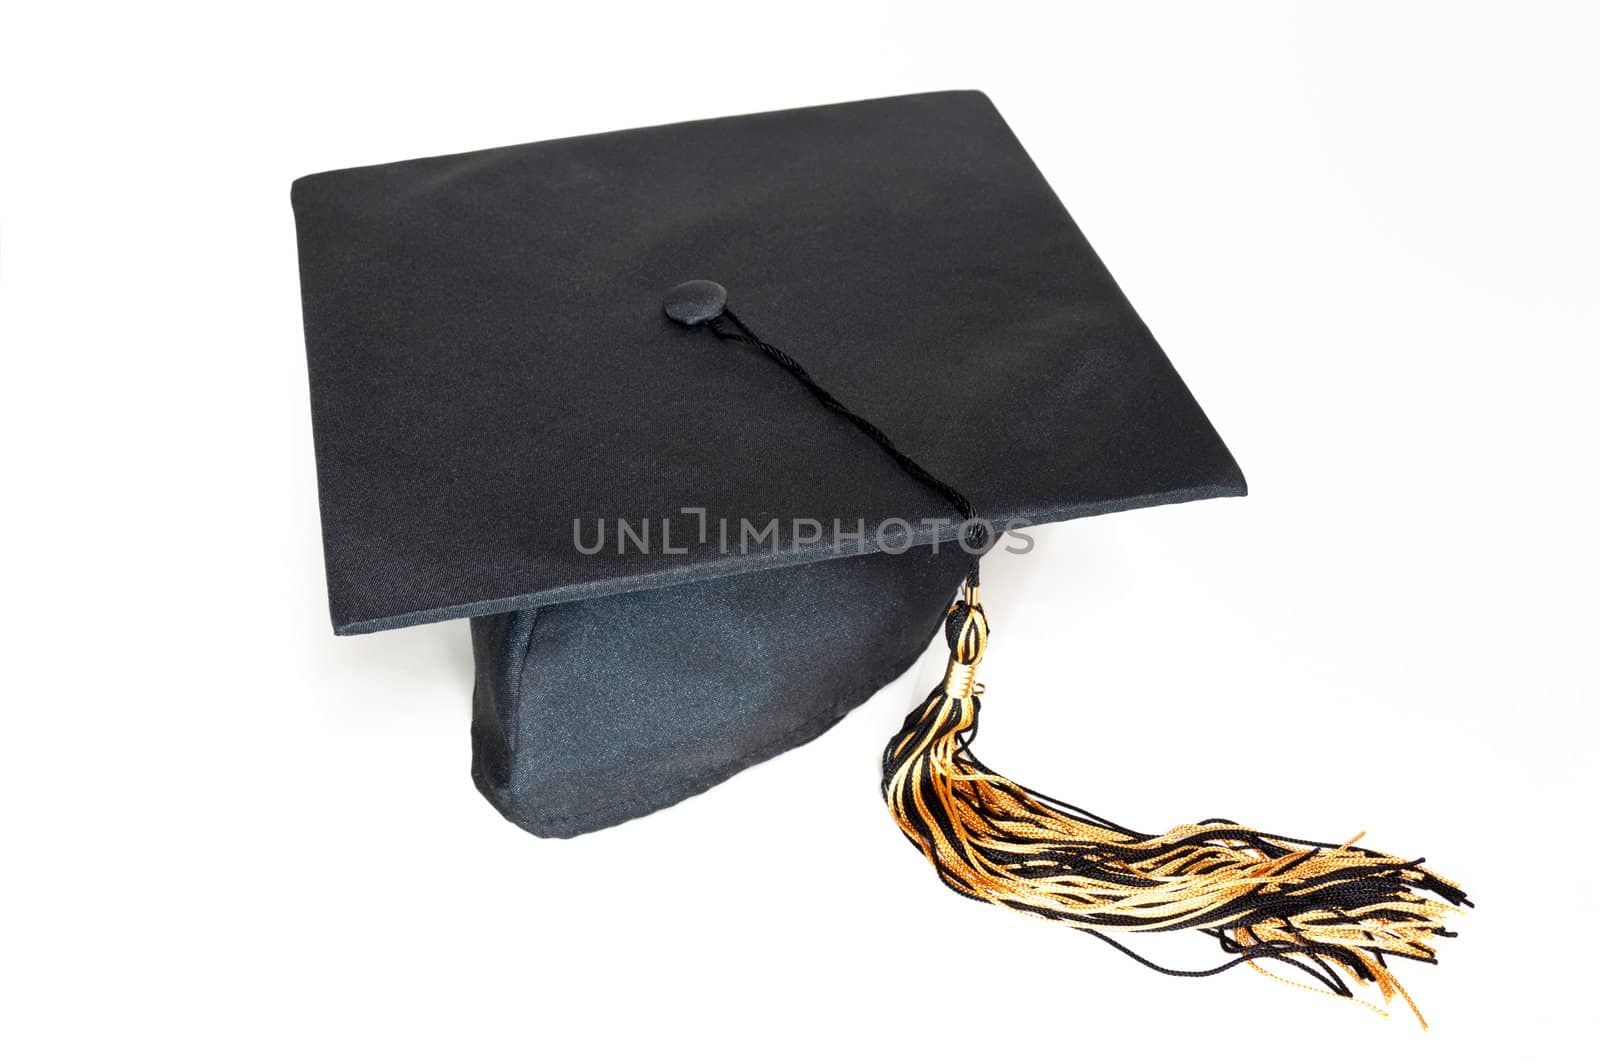 Black graduation cap with tassel on the white background.